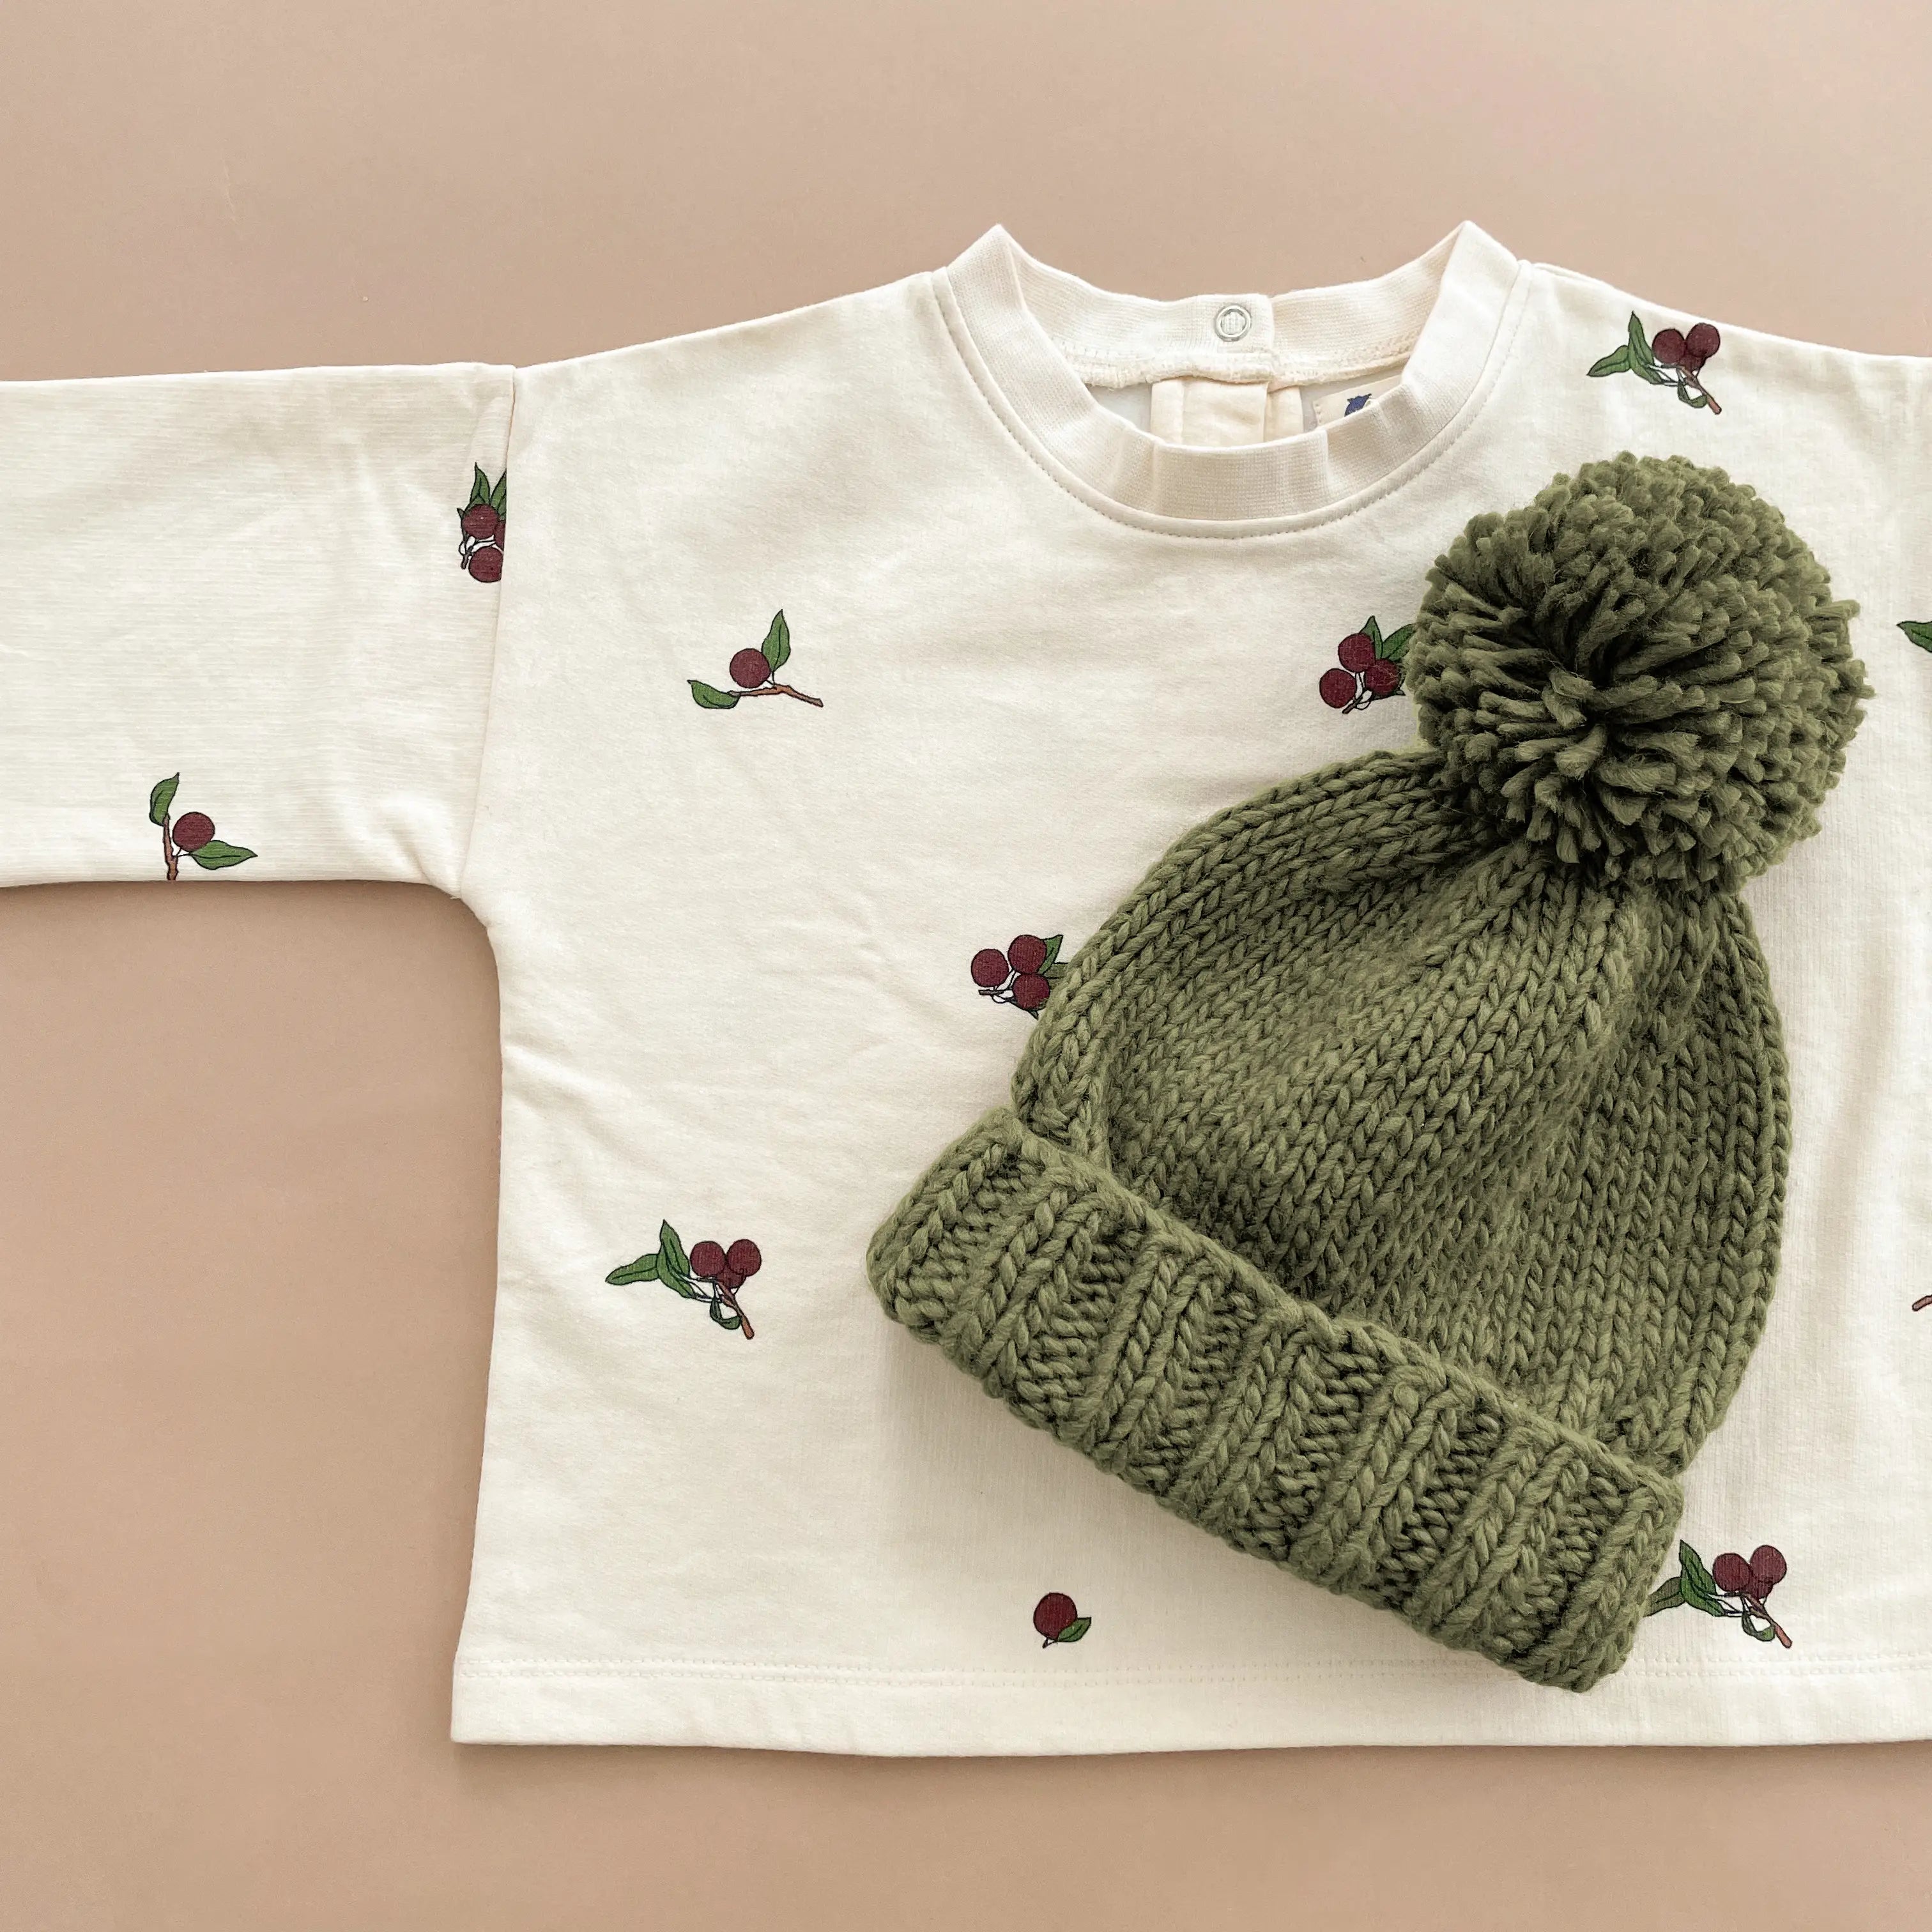 classic pom hat in olive by The Blueberry Hill